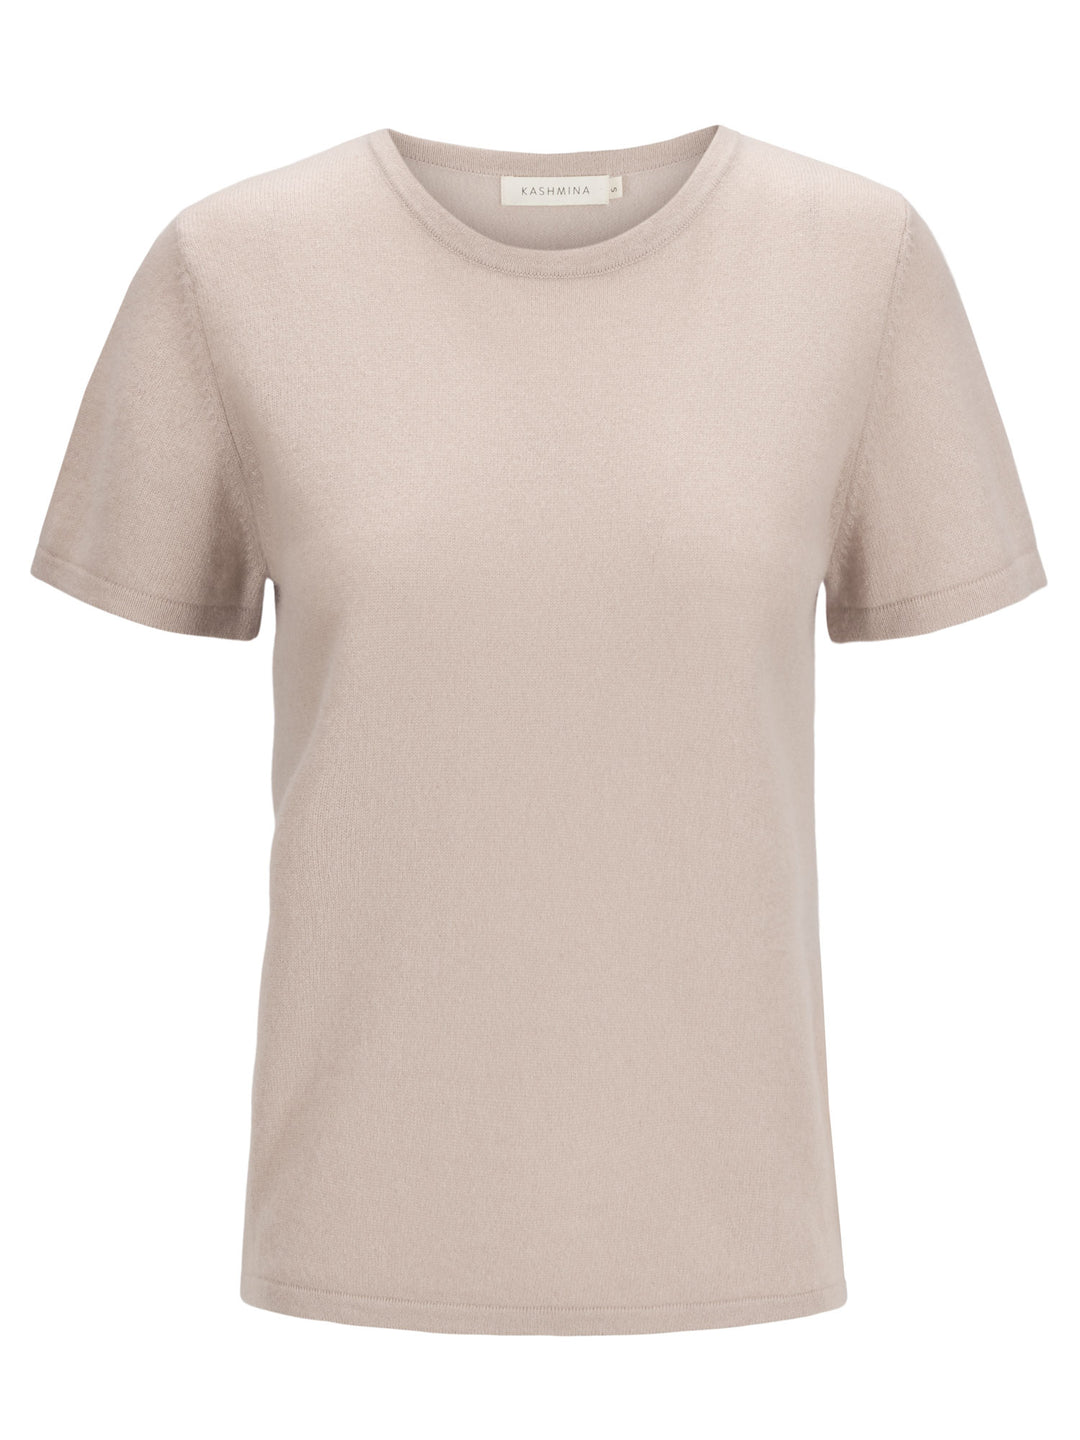 cashmere t-shirt tee shirt sustainable fashion luxury quality norwegian design. Color: Feather.